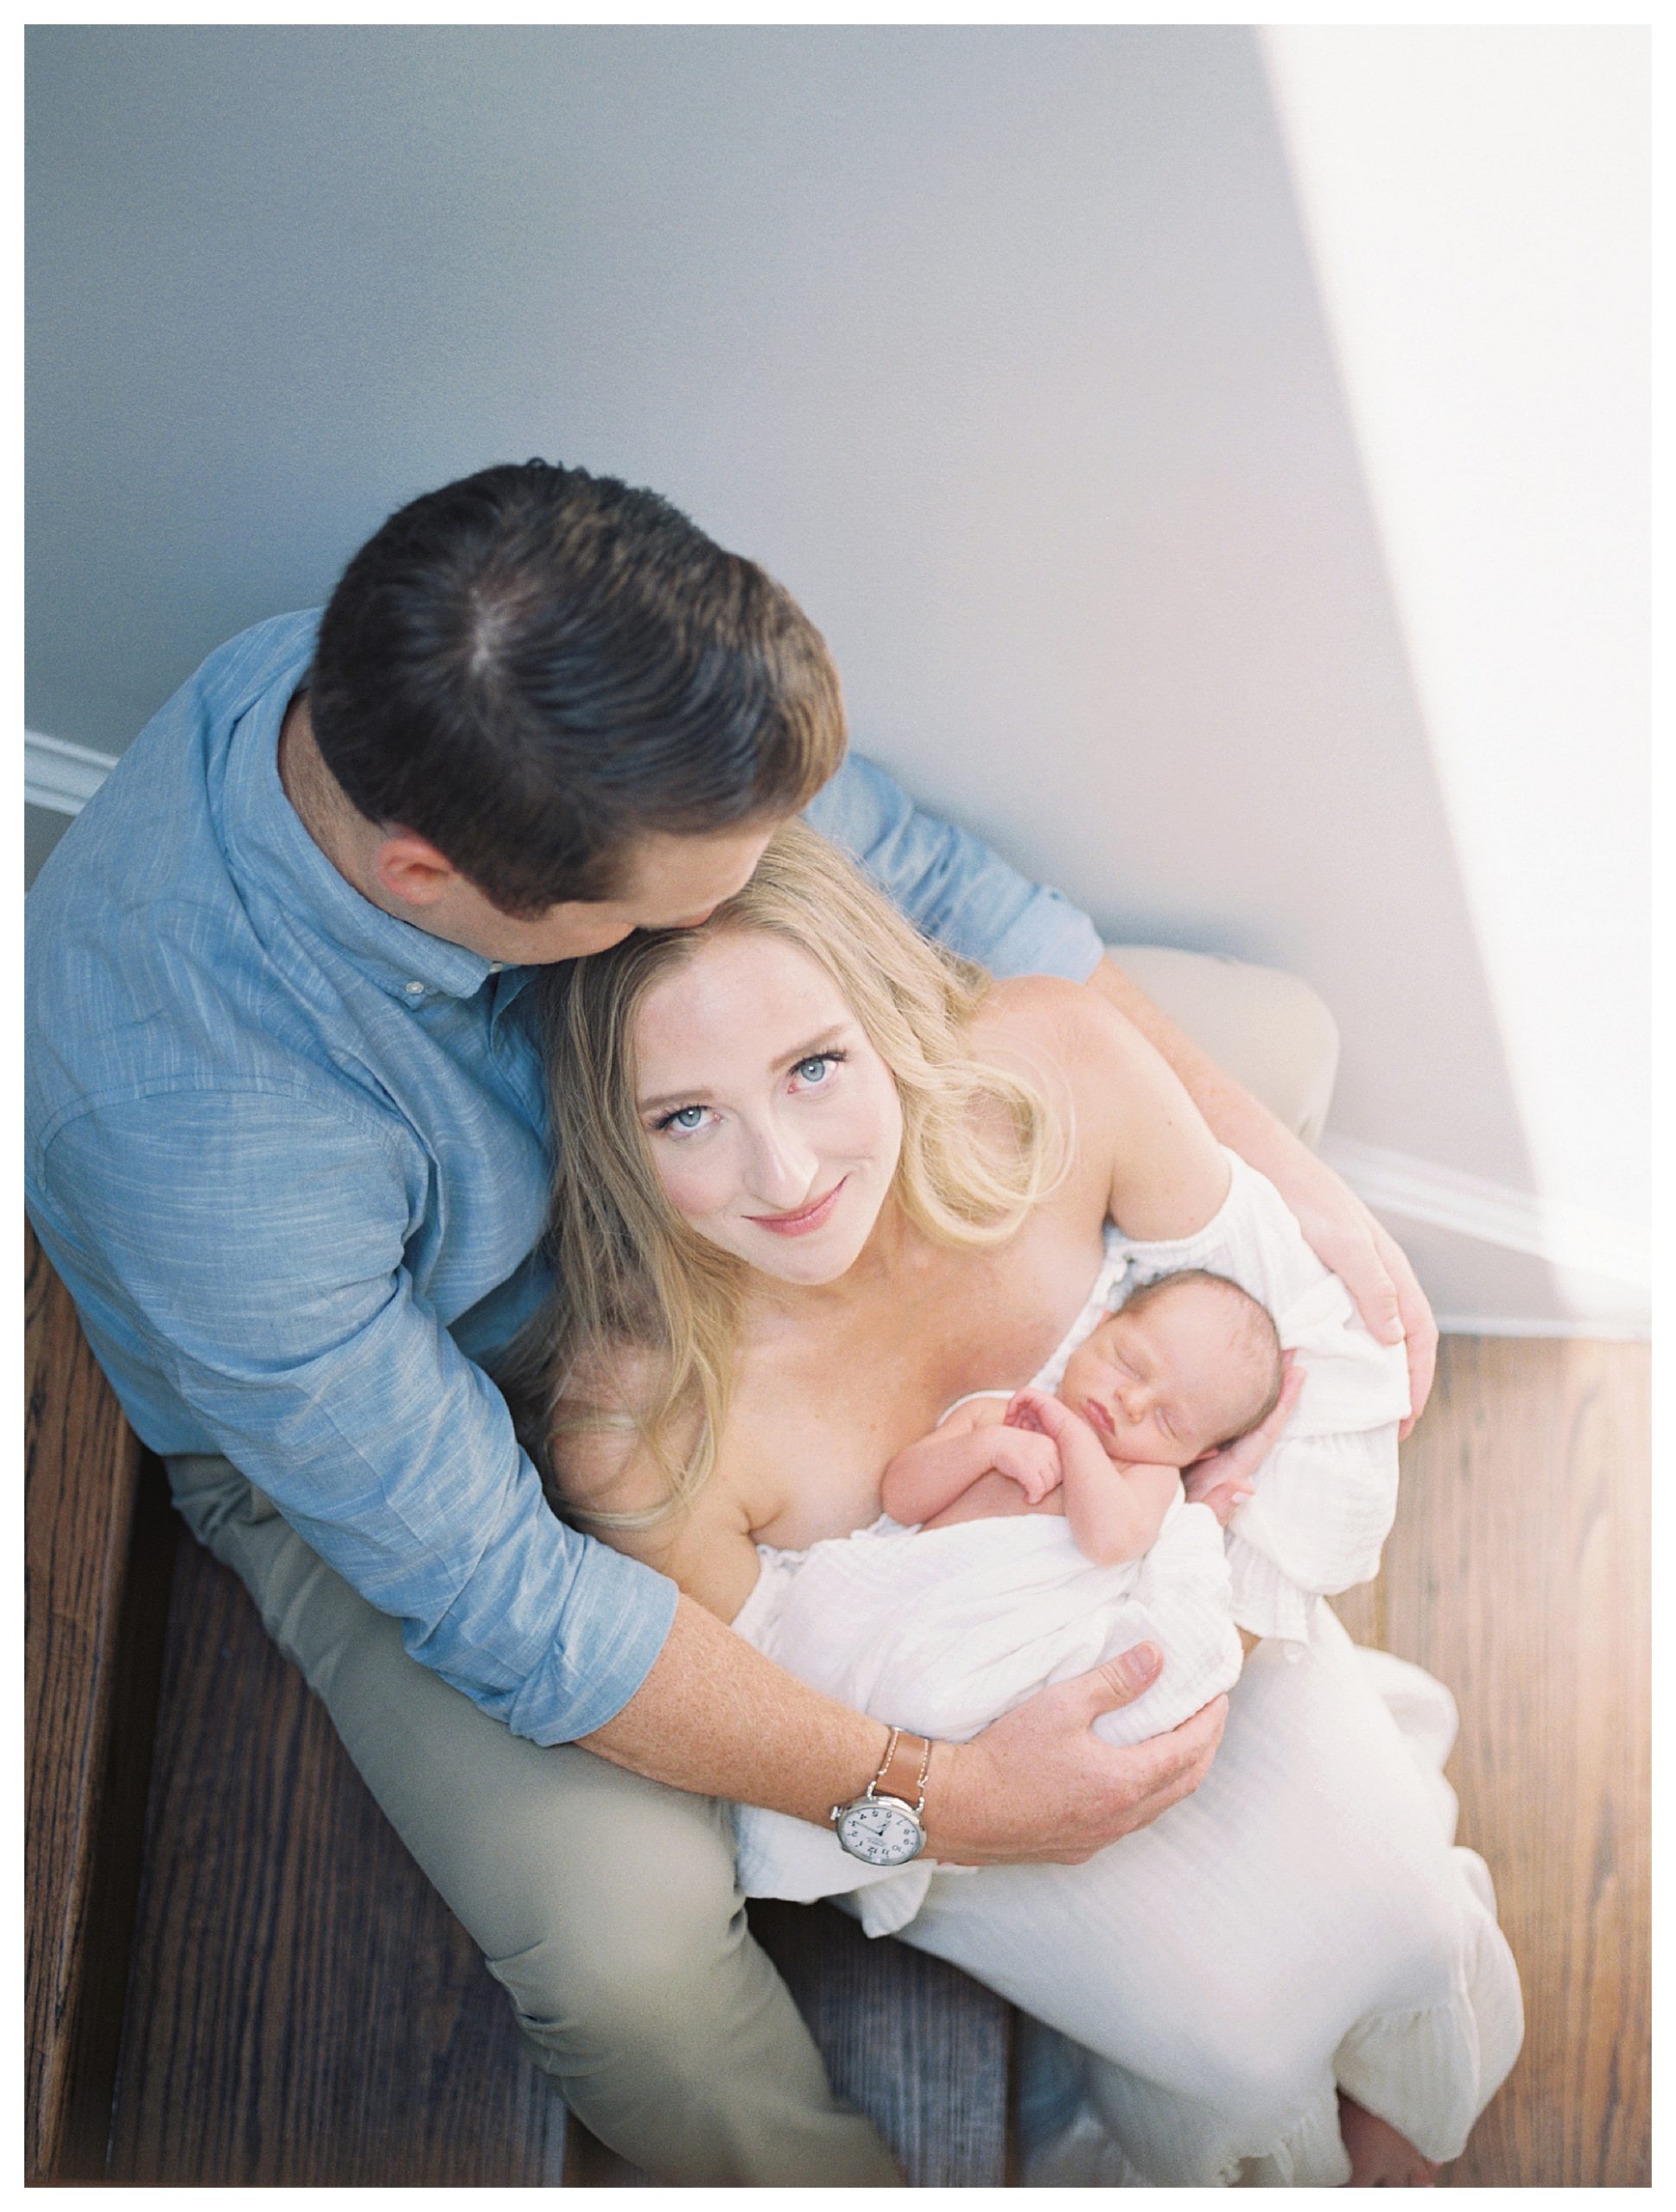 Blonde mother sits on steps with husband holding newborn baby and looks at the camera.